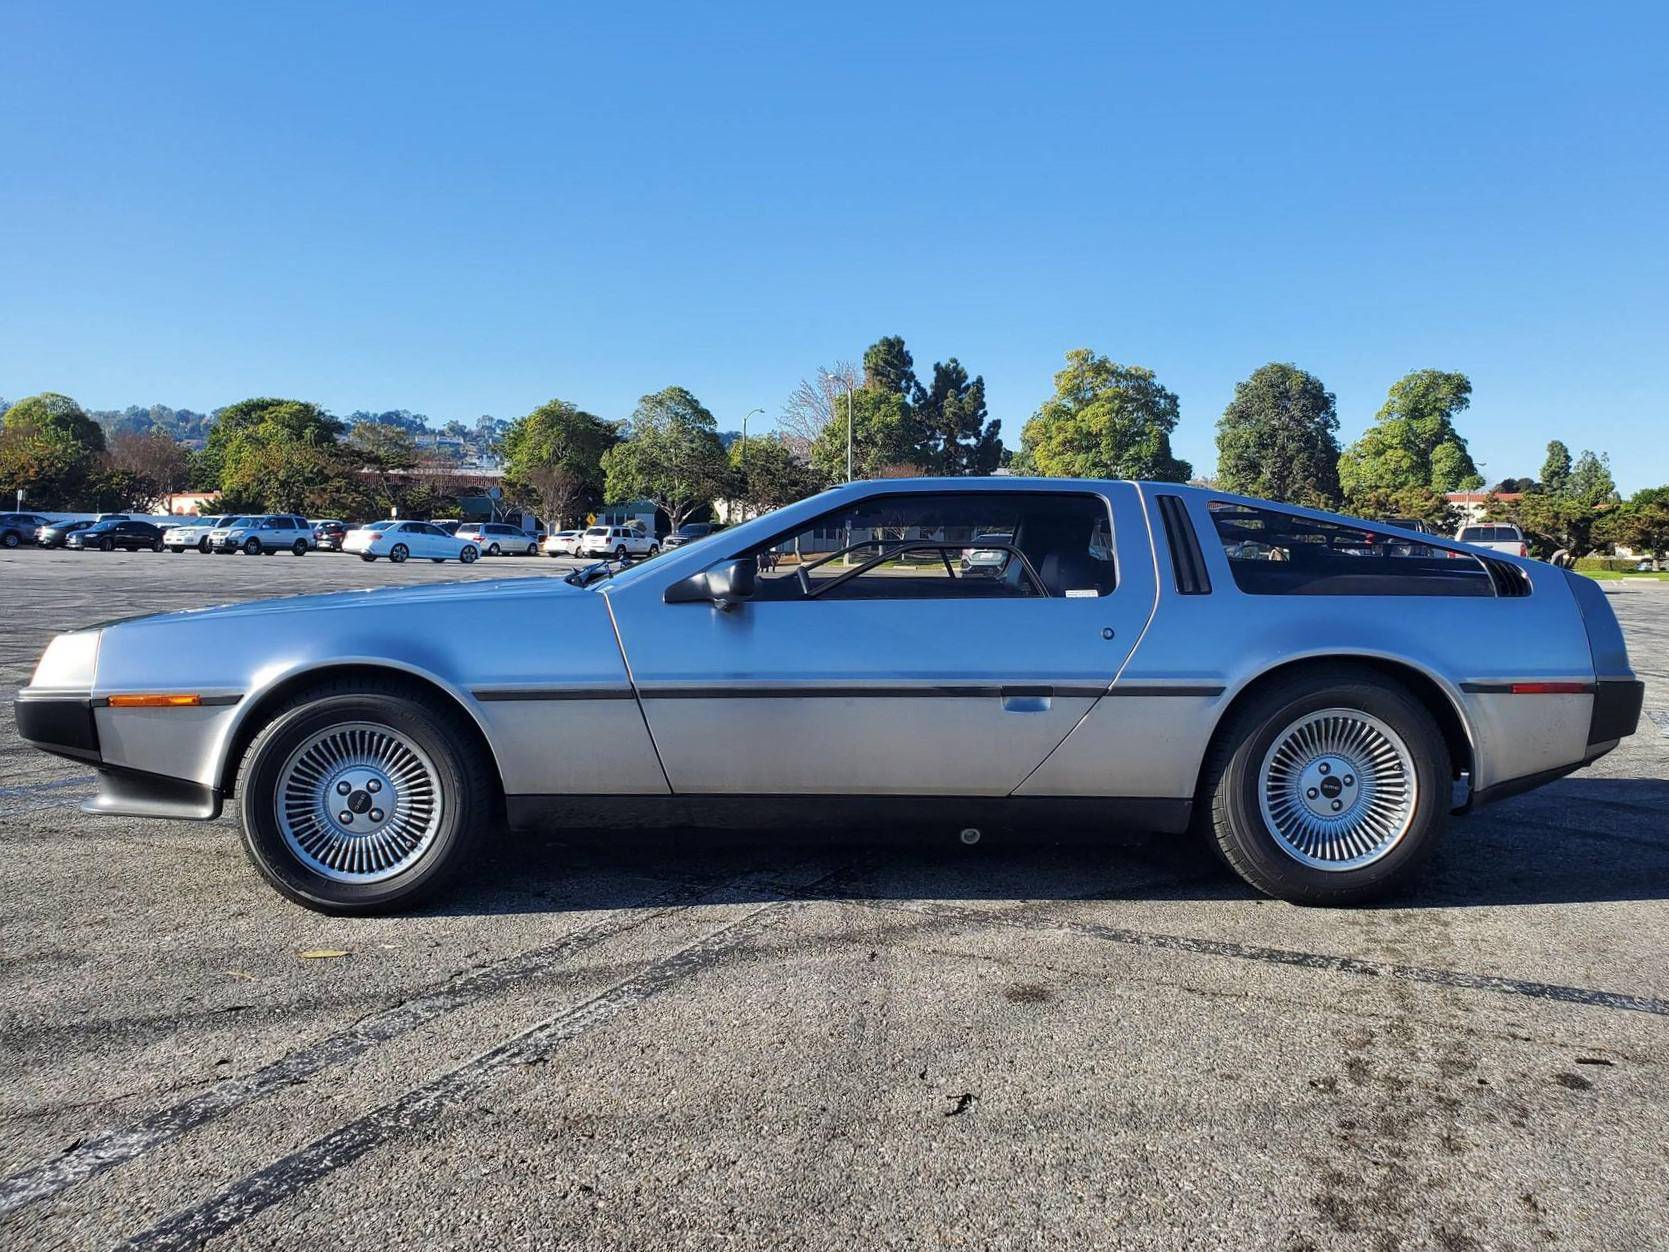 An electric DeLorean might be on the cards